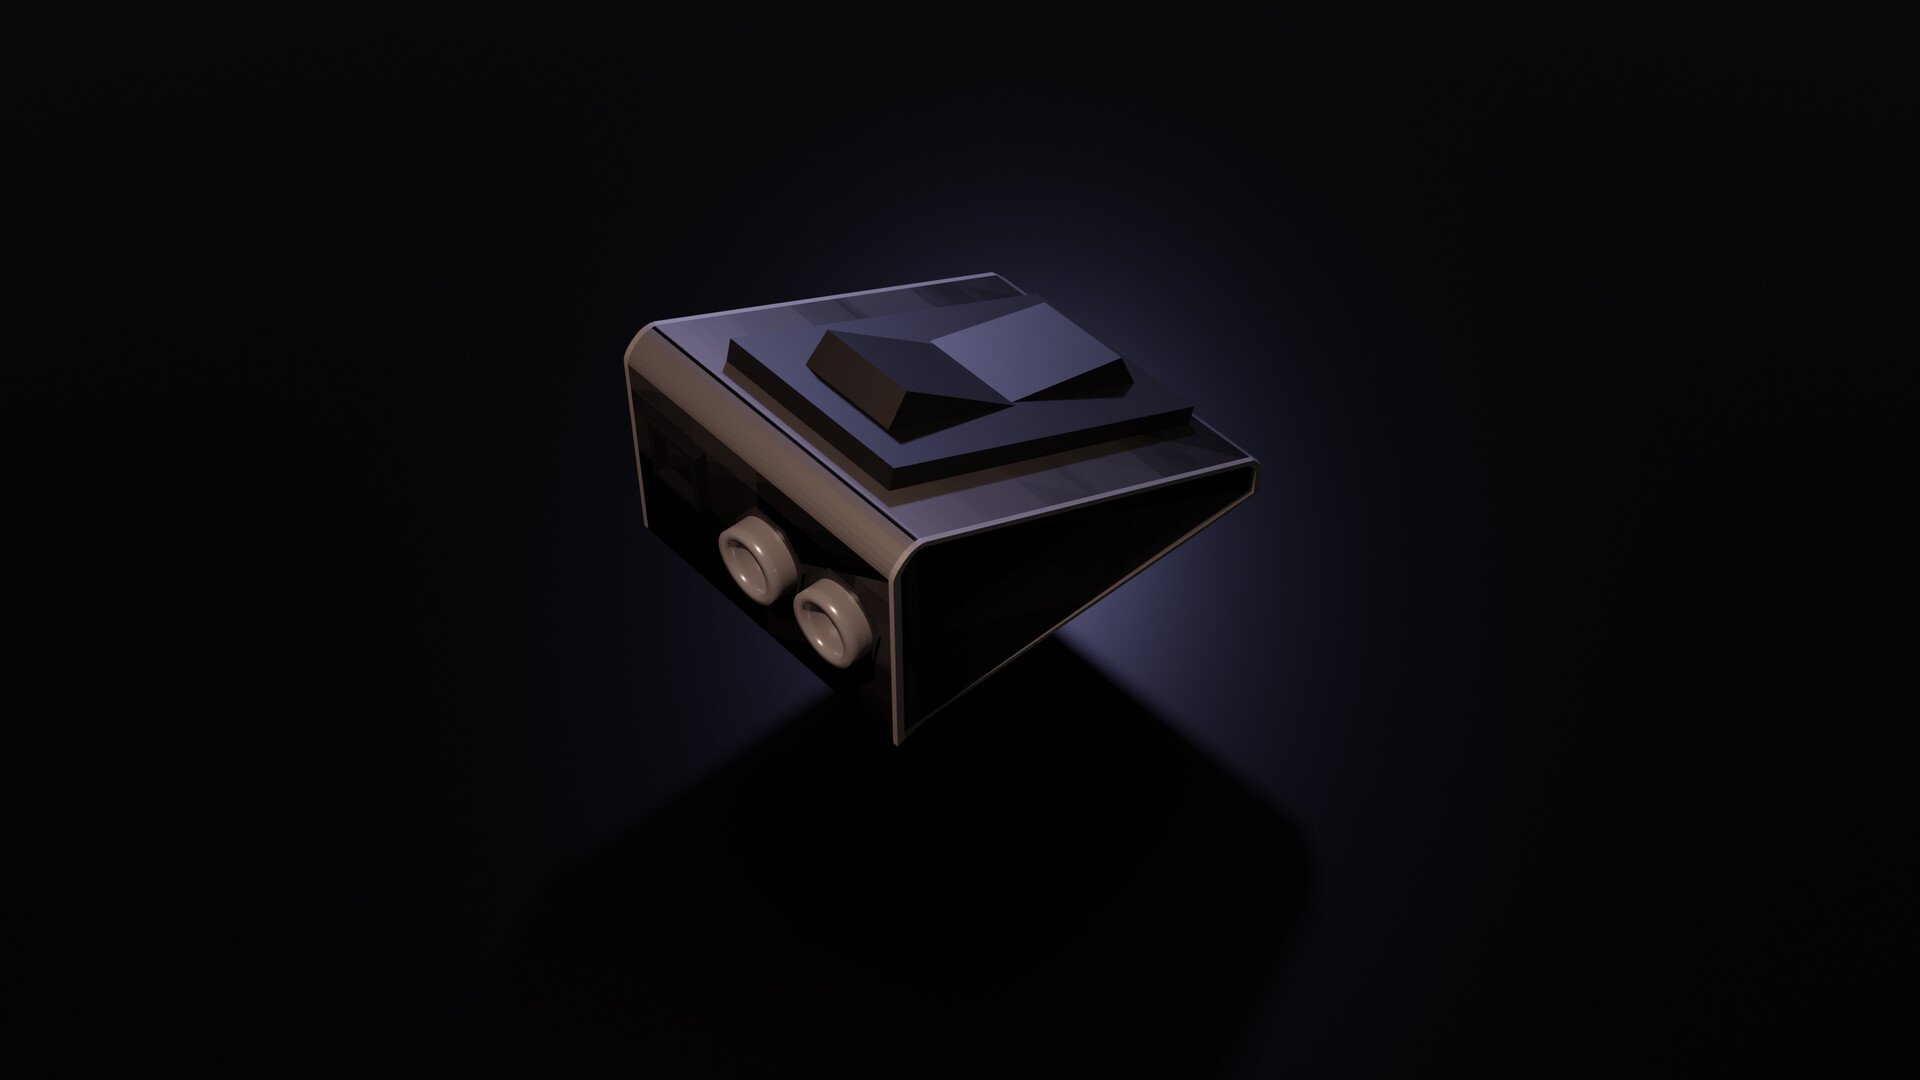 ArtStation - Dual Foot Switch Guitar Pedal Lowpoly